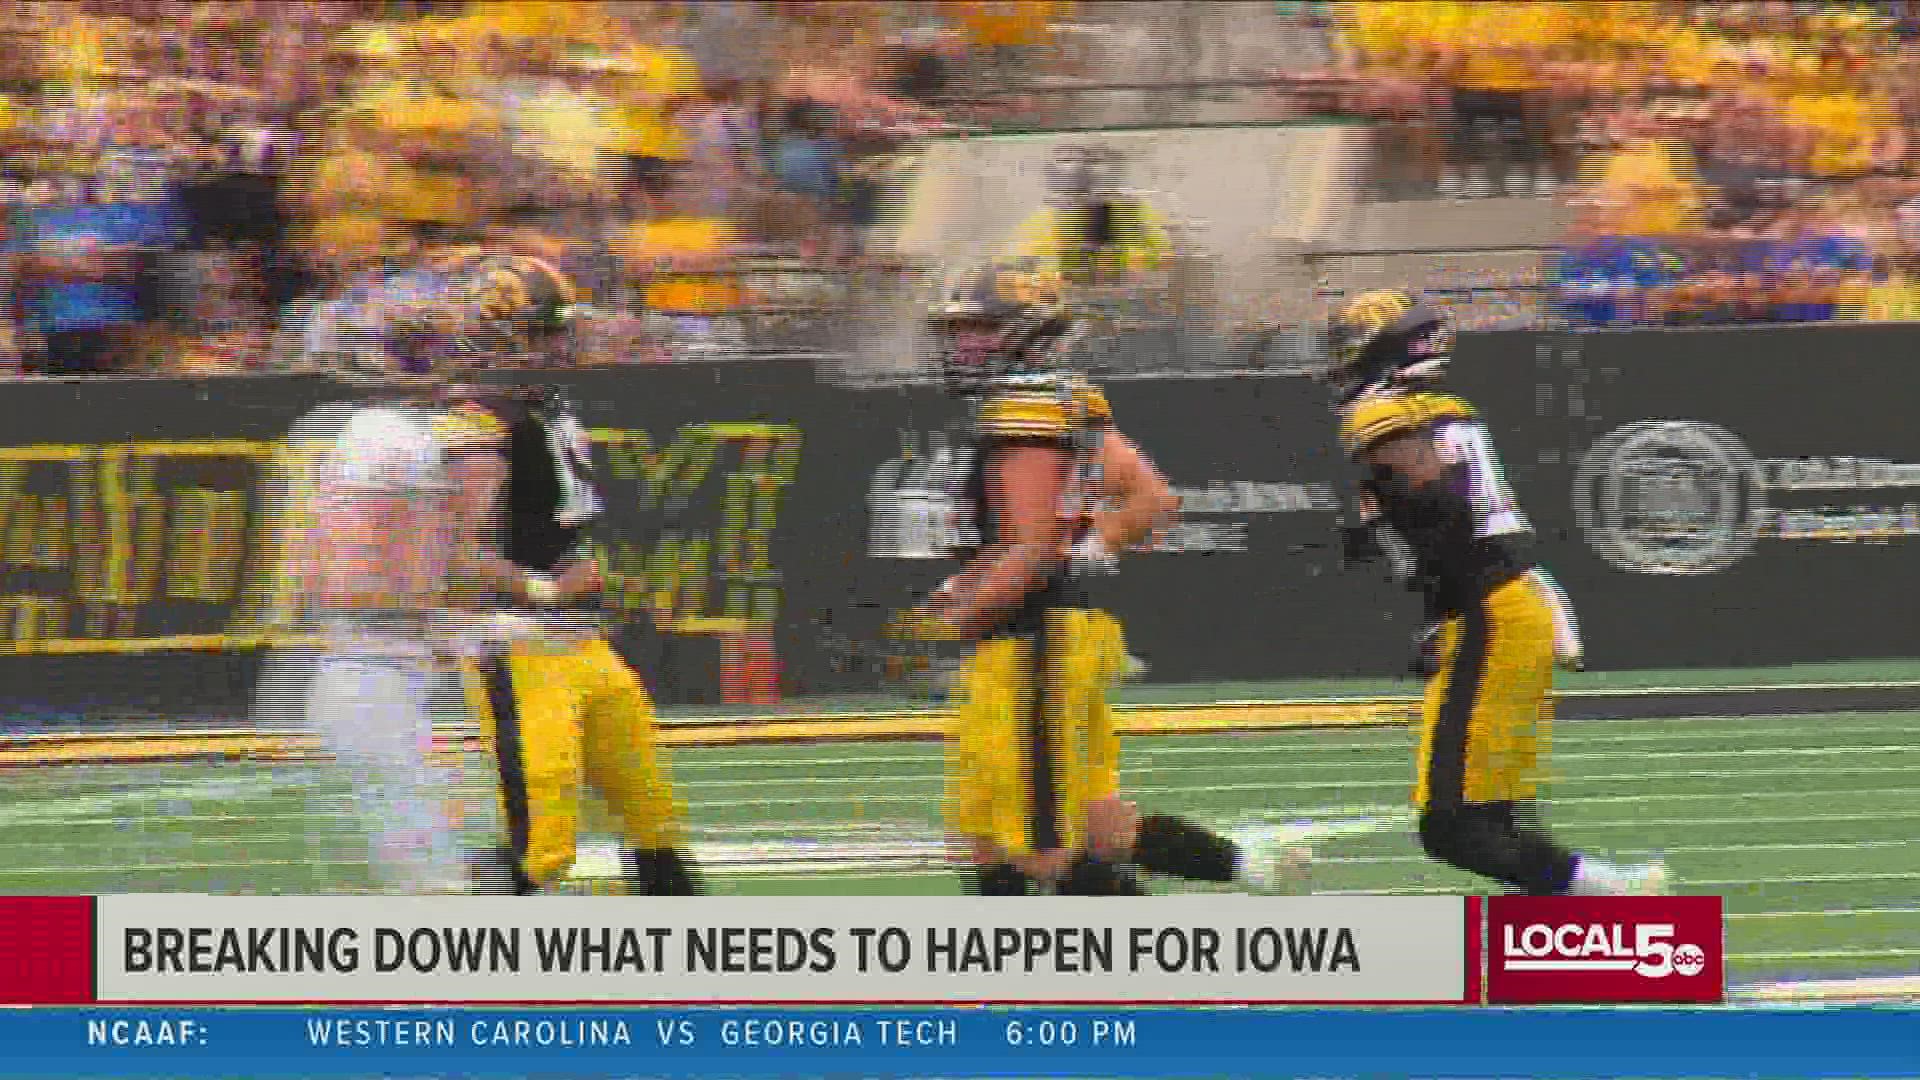 Host of the Locked On Hawkeyes Podcast Trent Condon breaks down what needs to happen for Iowa to come out with a win over Iowa State.